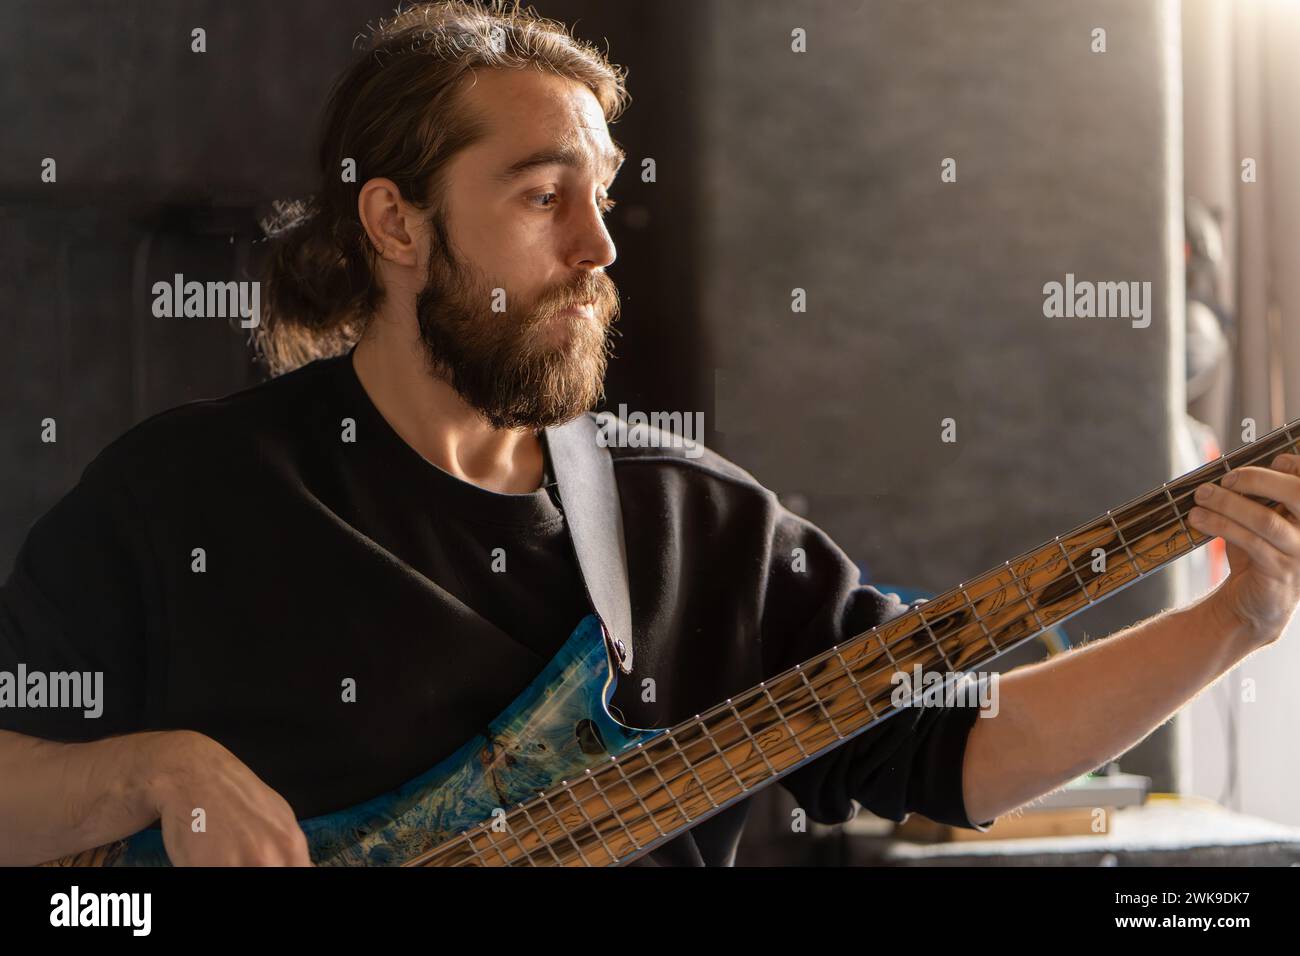 Man with beard plays bass guitar. His fingers move quickly along the strings, creating music. Musician focused and in moment, showcasing his passion for music. Stock Photo